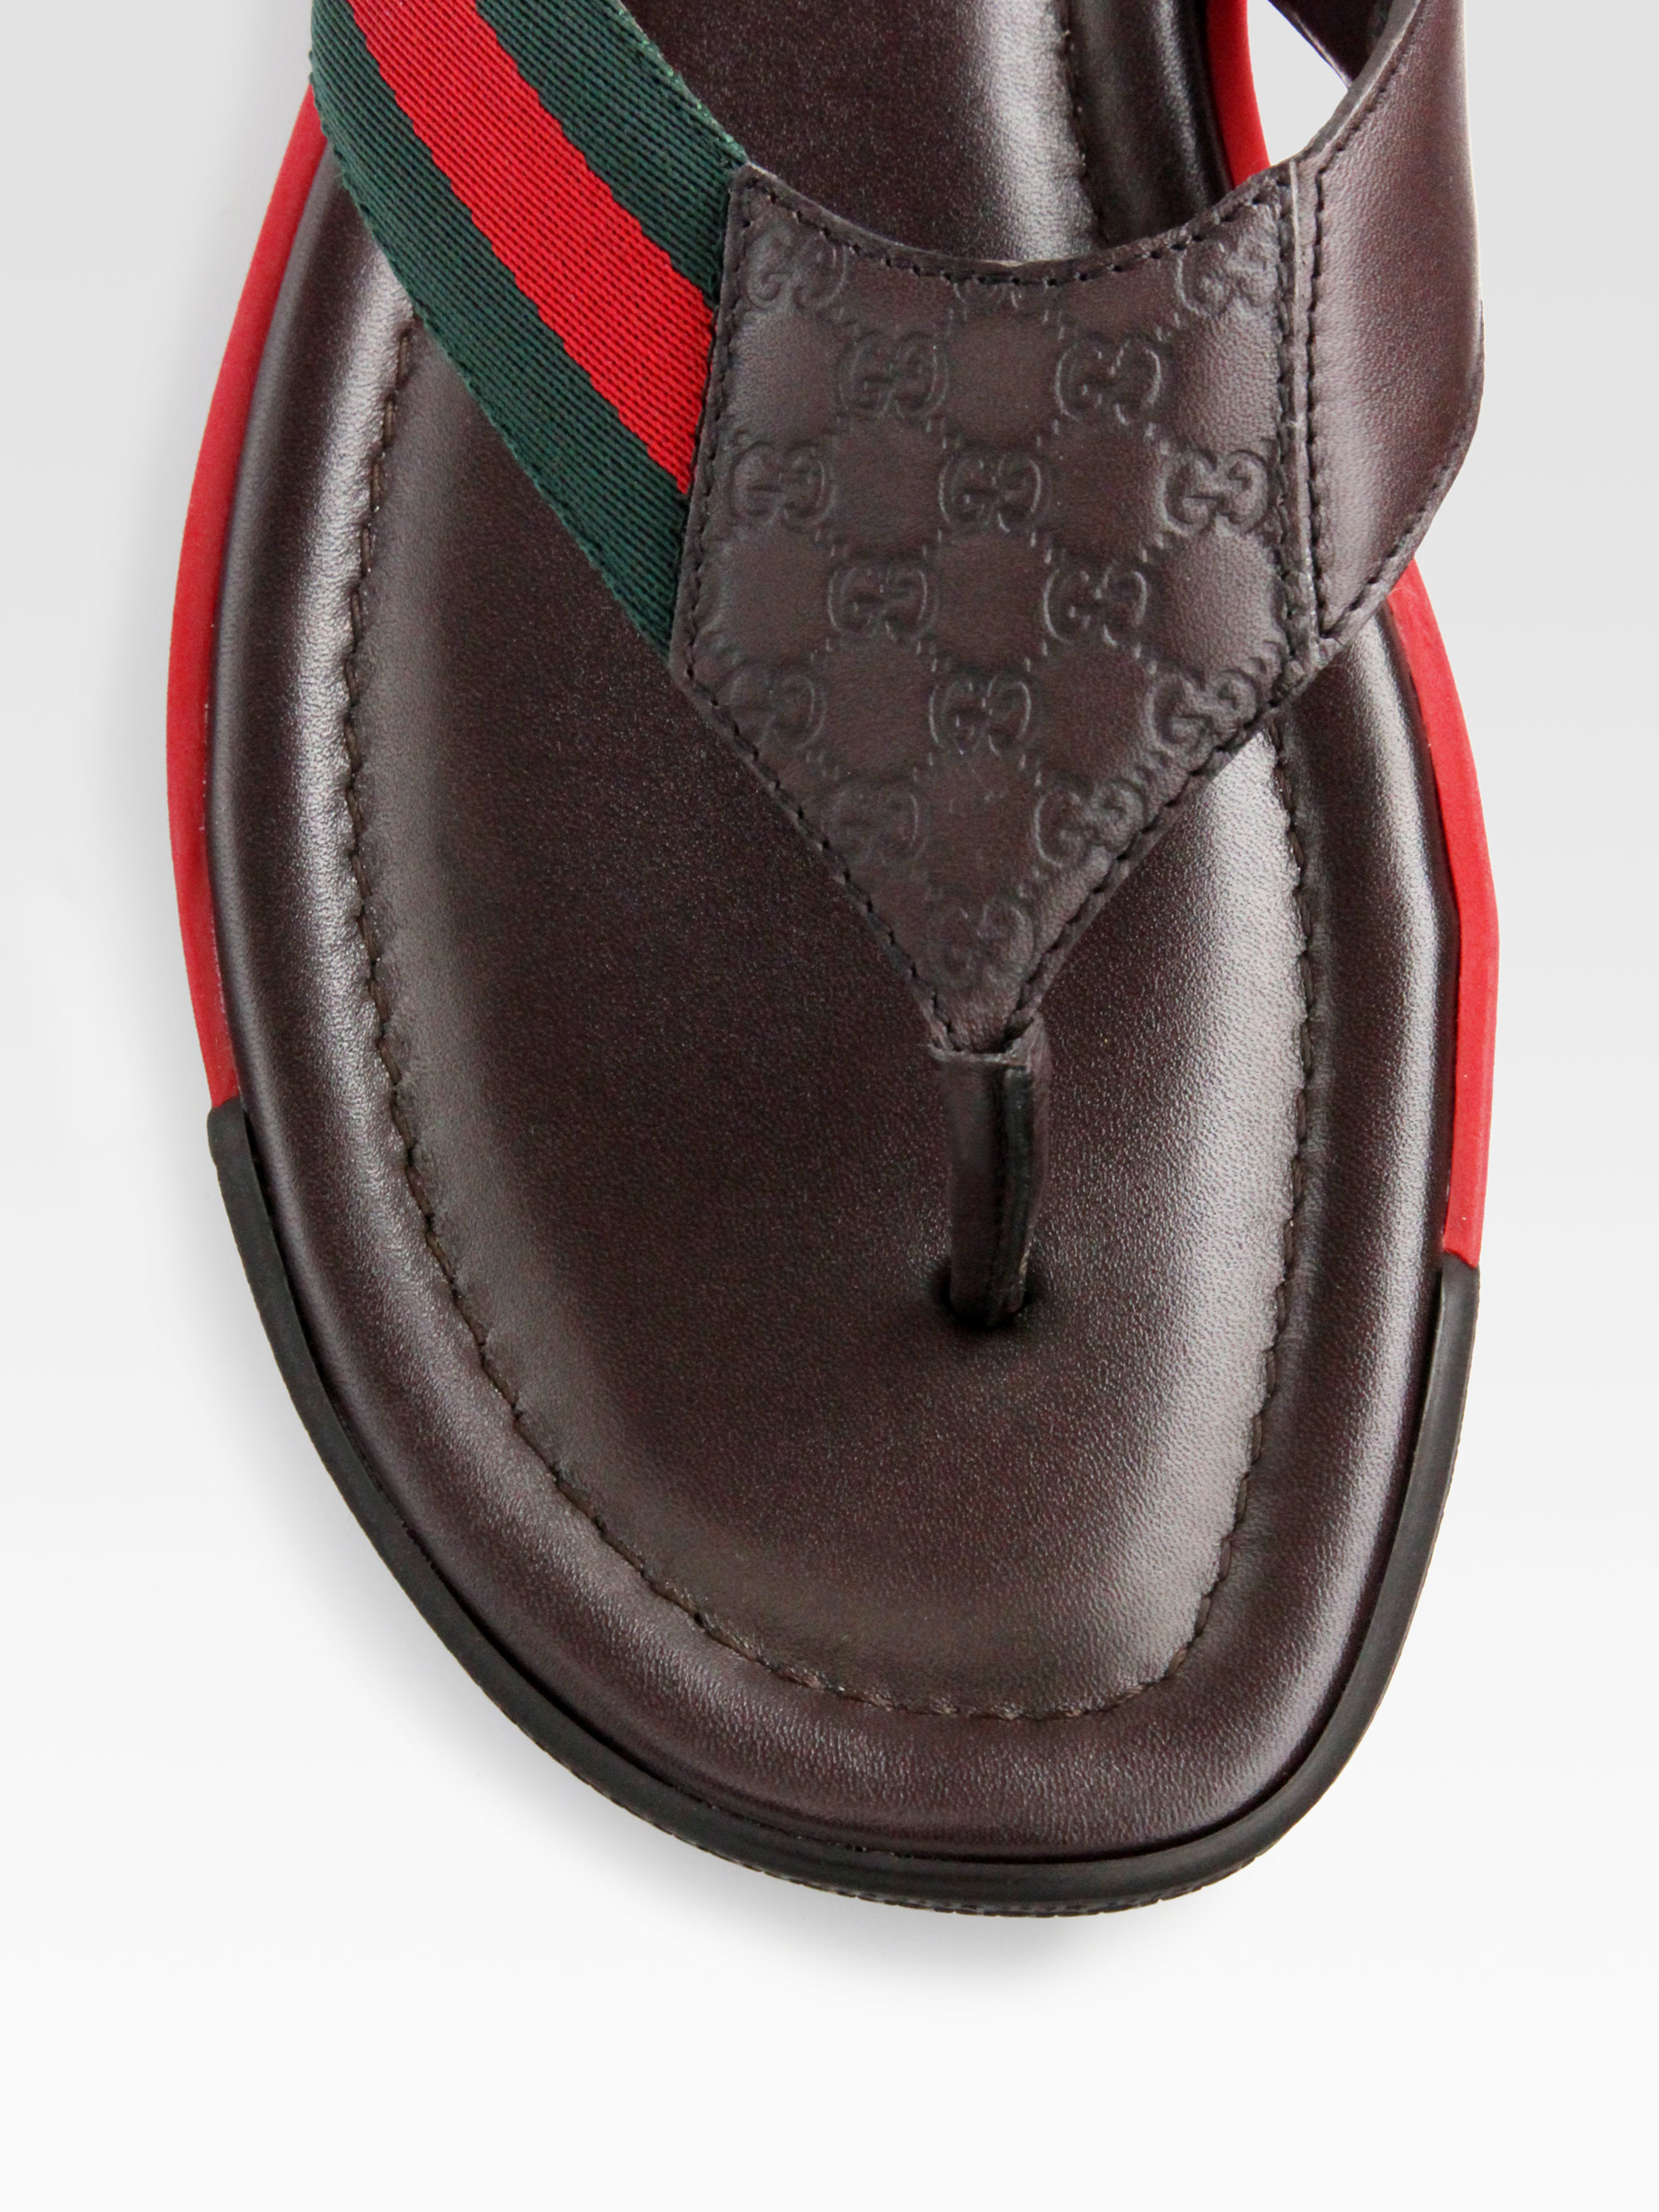 Gucci Thong Sandals in Dark Chocolate (Brown) for Men - Lyst